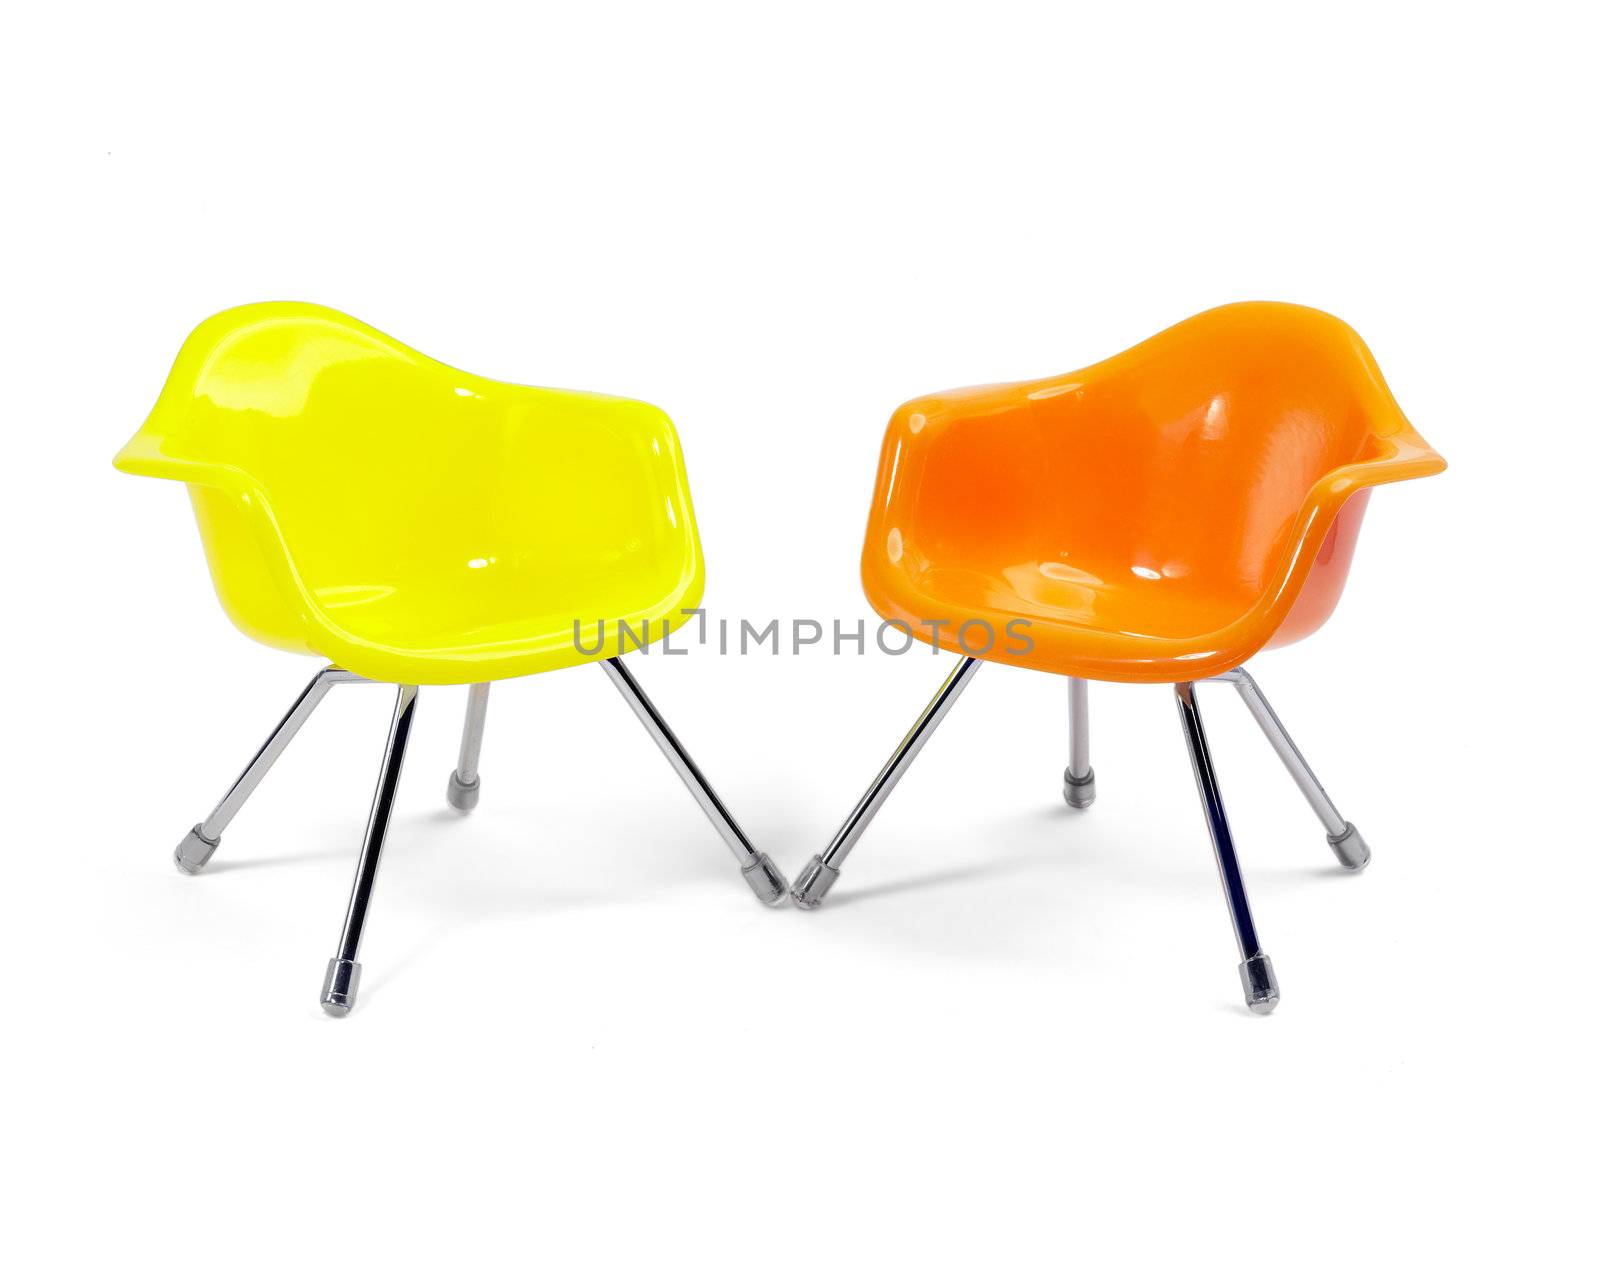 coulored plastic chairs isolated on white background